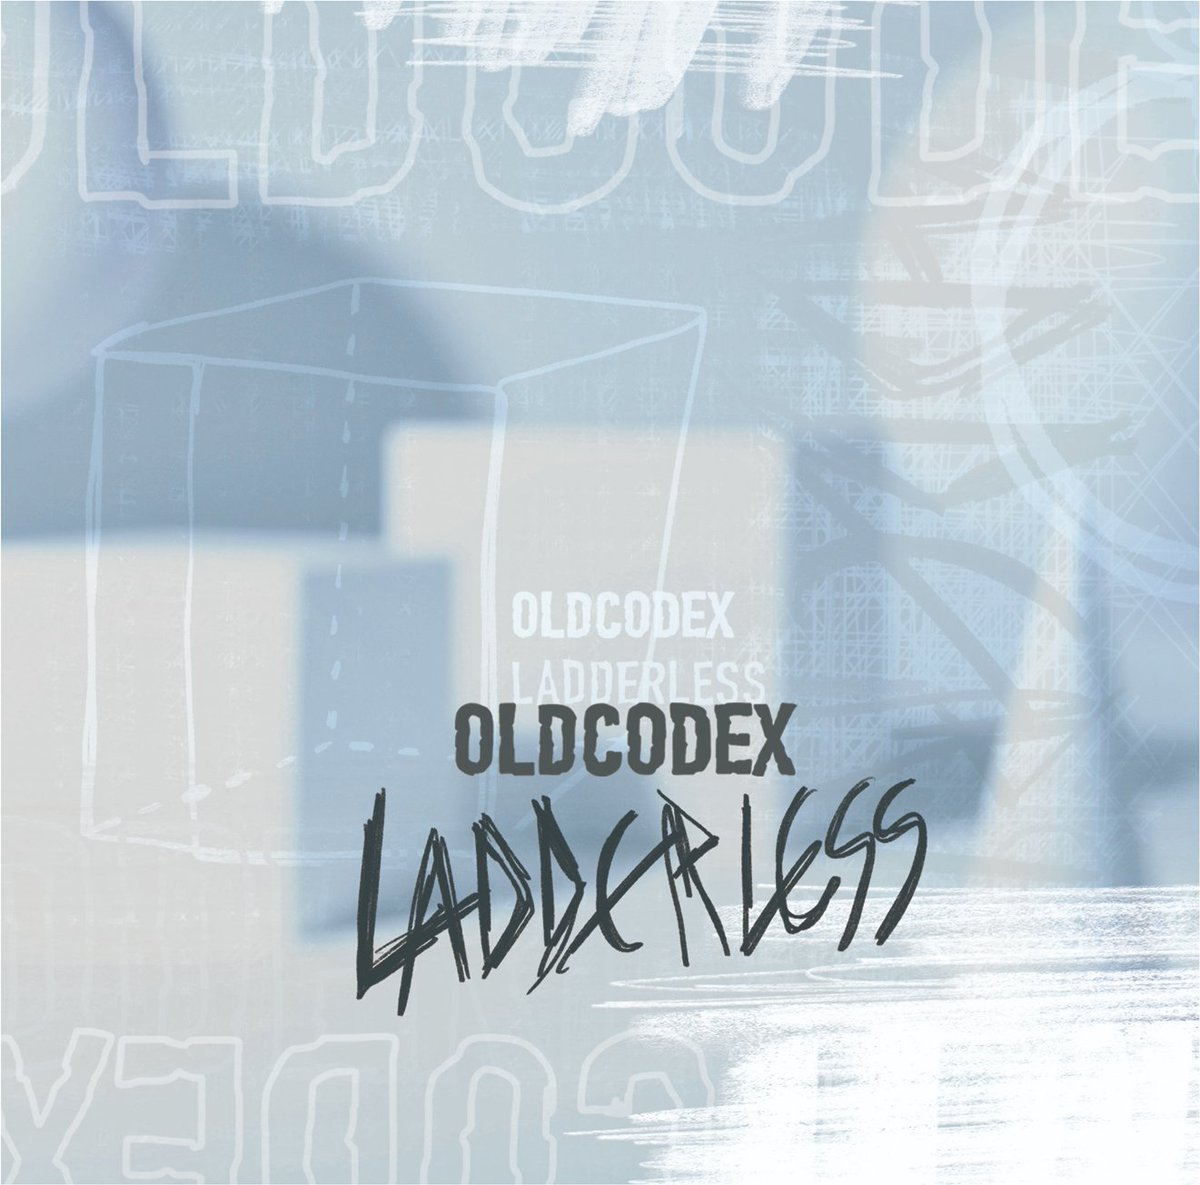 Cover art for『OLDCODEX - Sight Over The Battle』from the release『LADDERLESS』